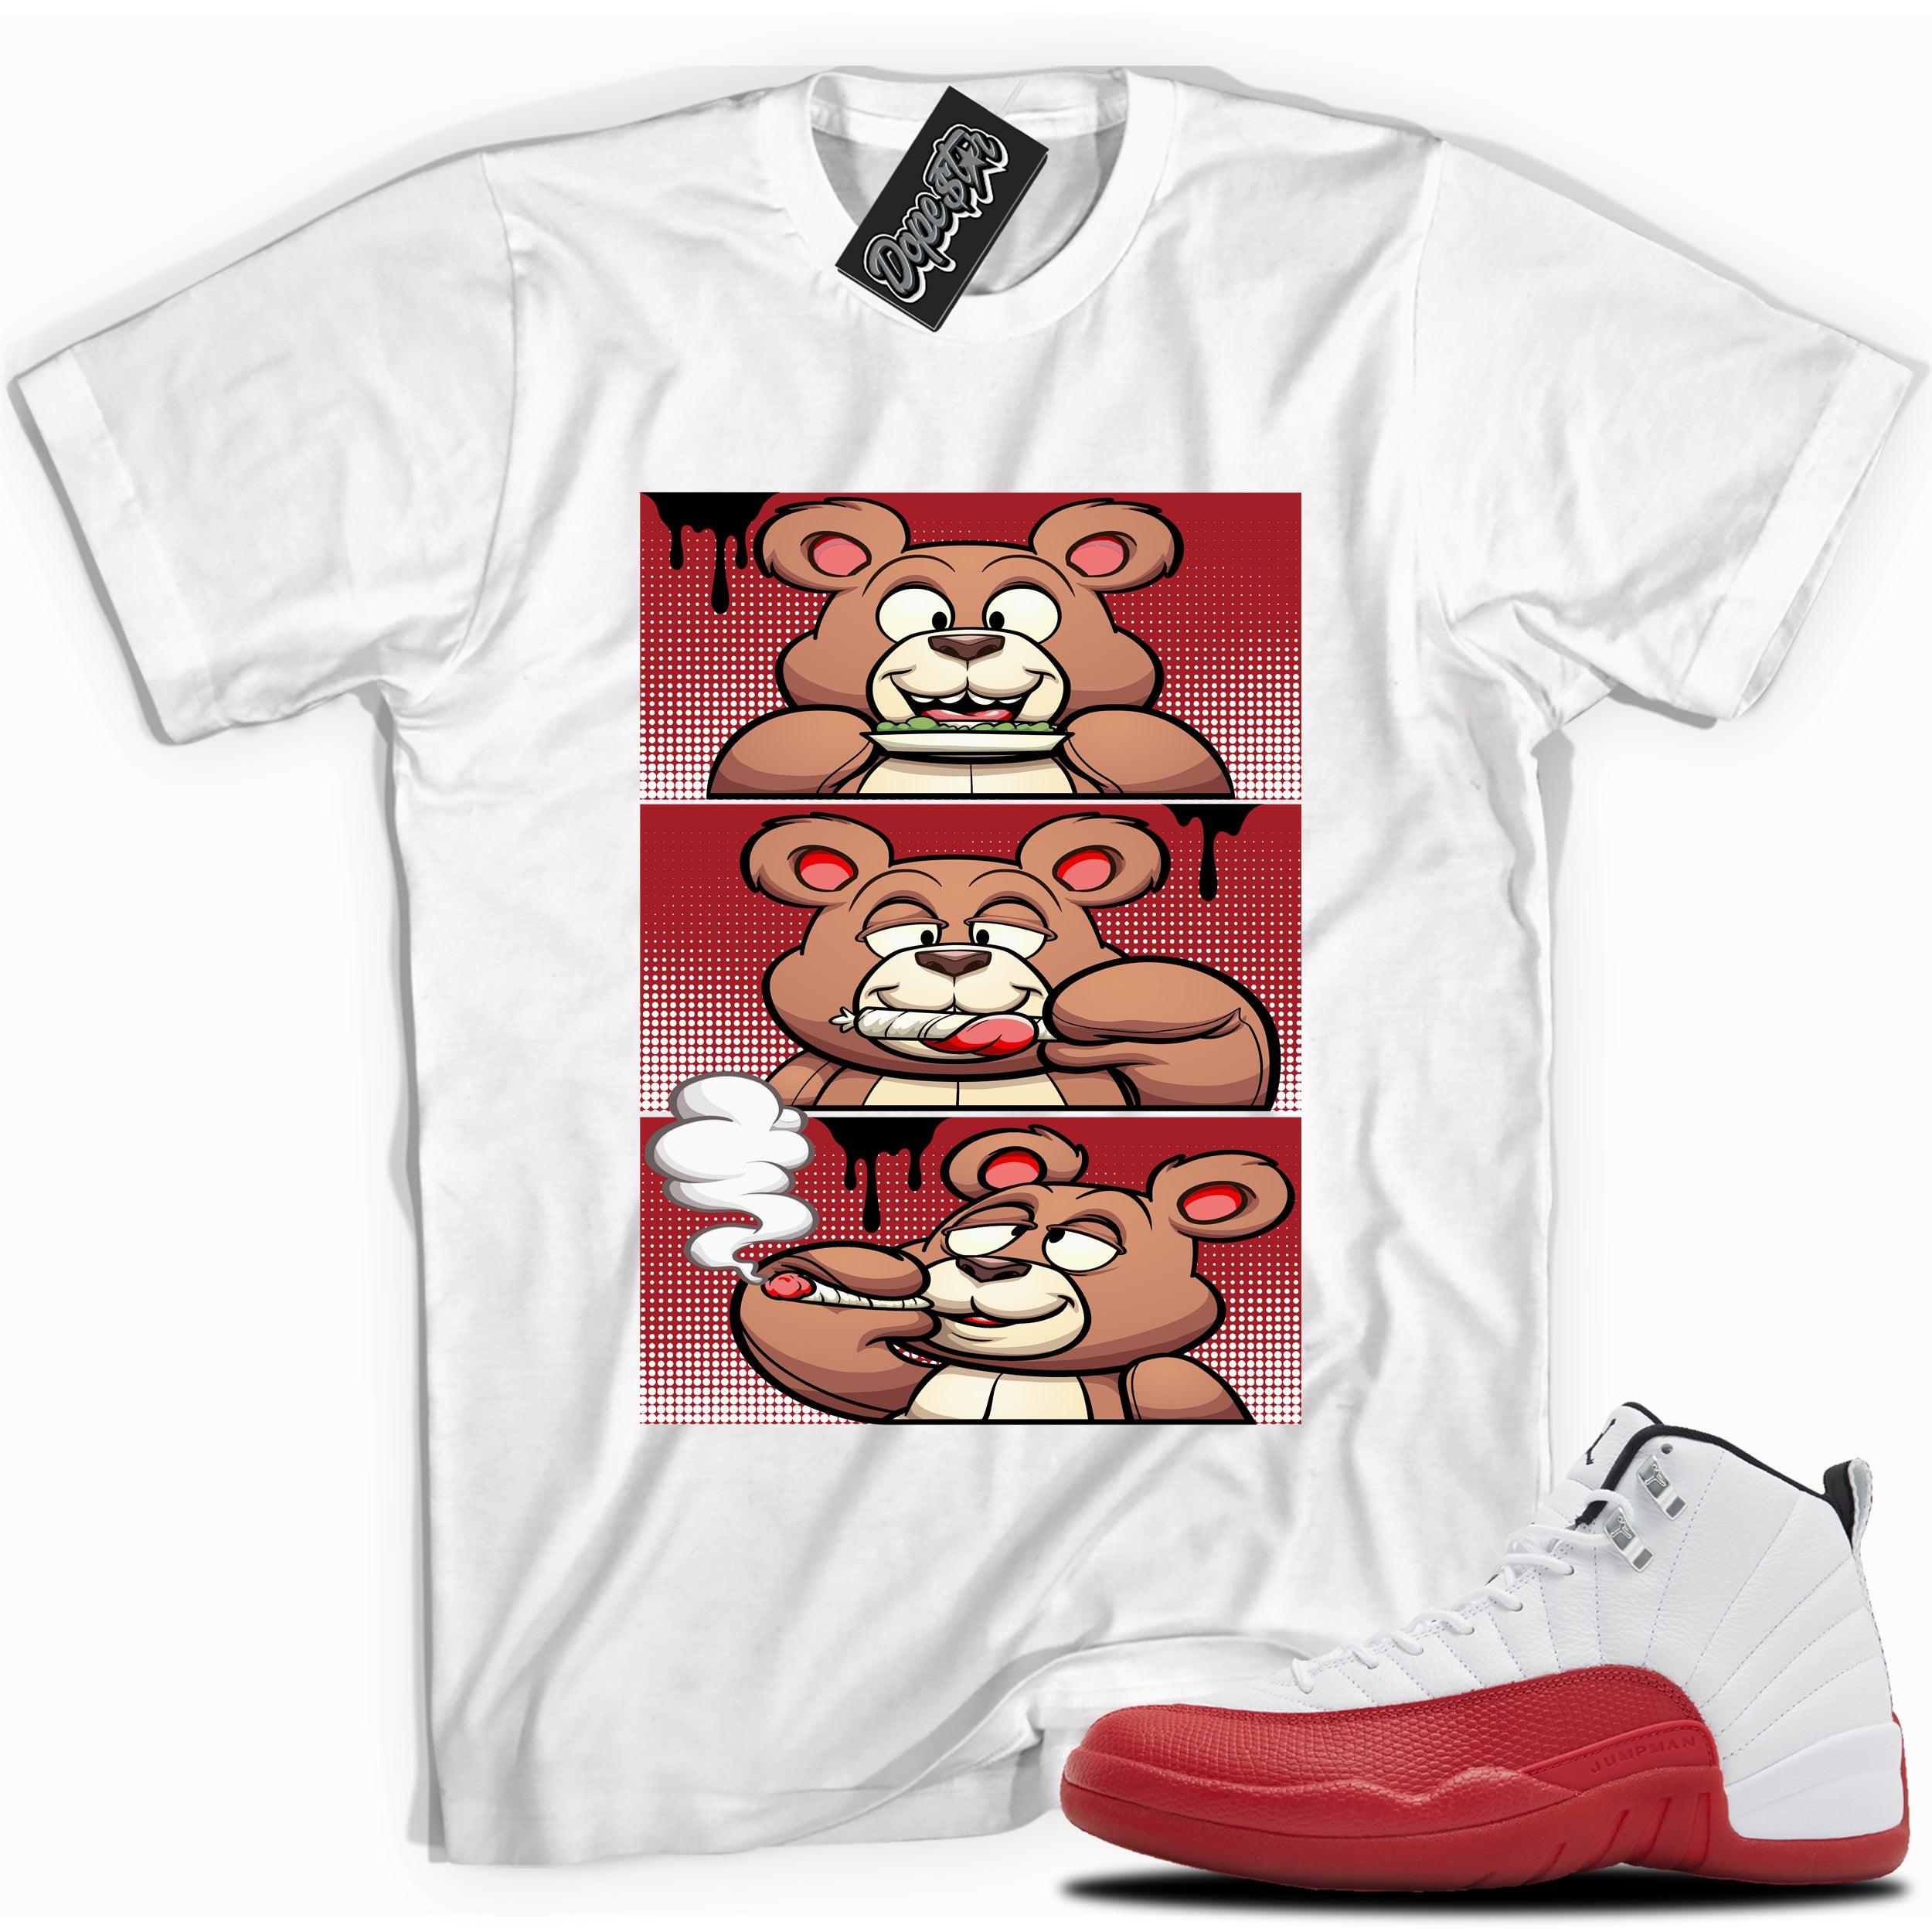 Cool White graphic tee with “Roll It Lick It Smoke It” print, that perfectly matches Air Jordan 12 Retro Cherry Red 2023 red and white sneakers